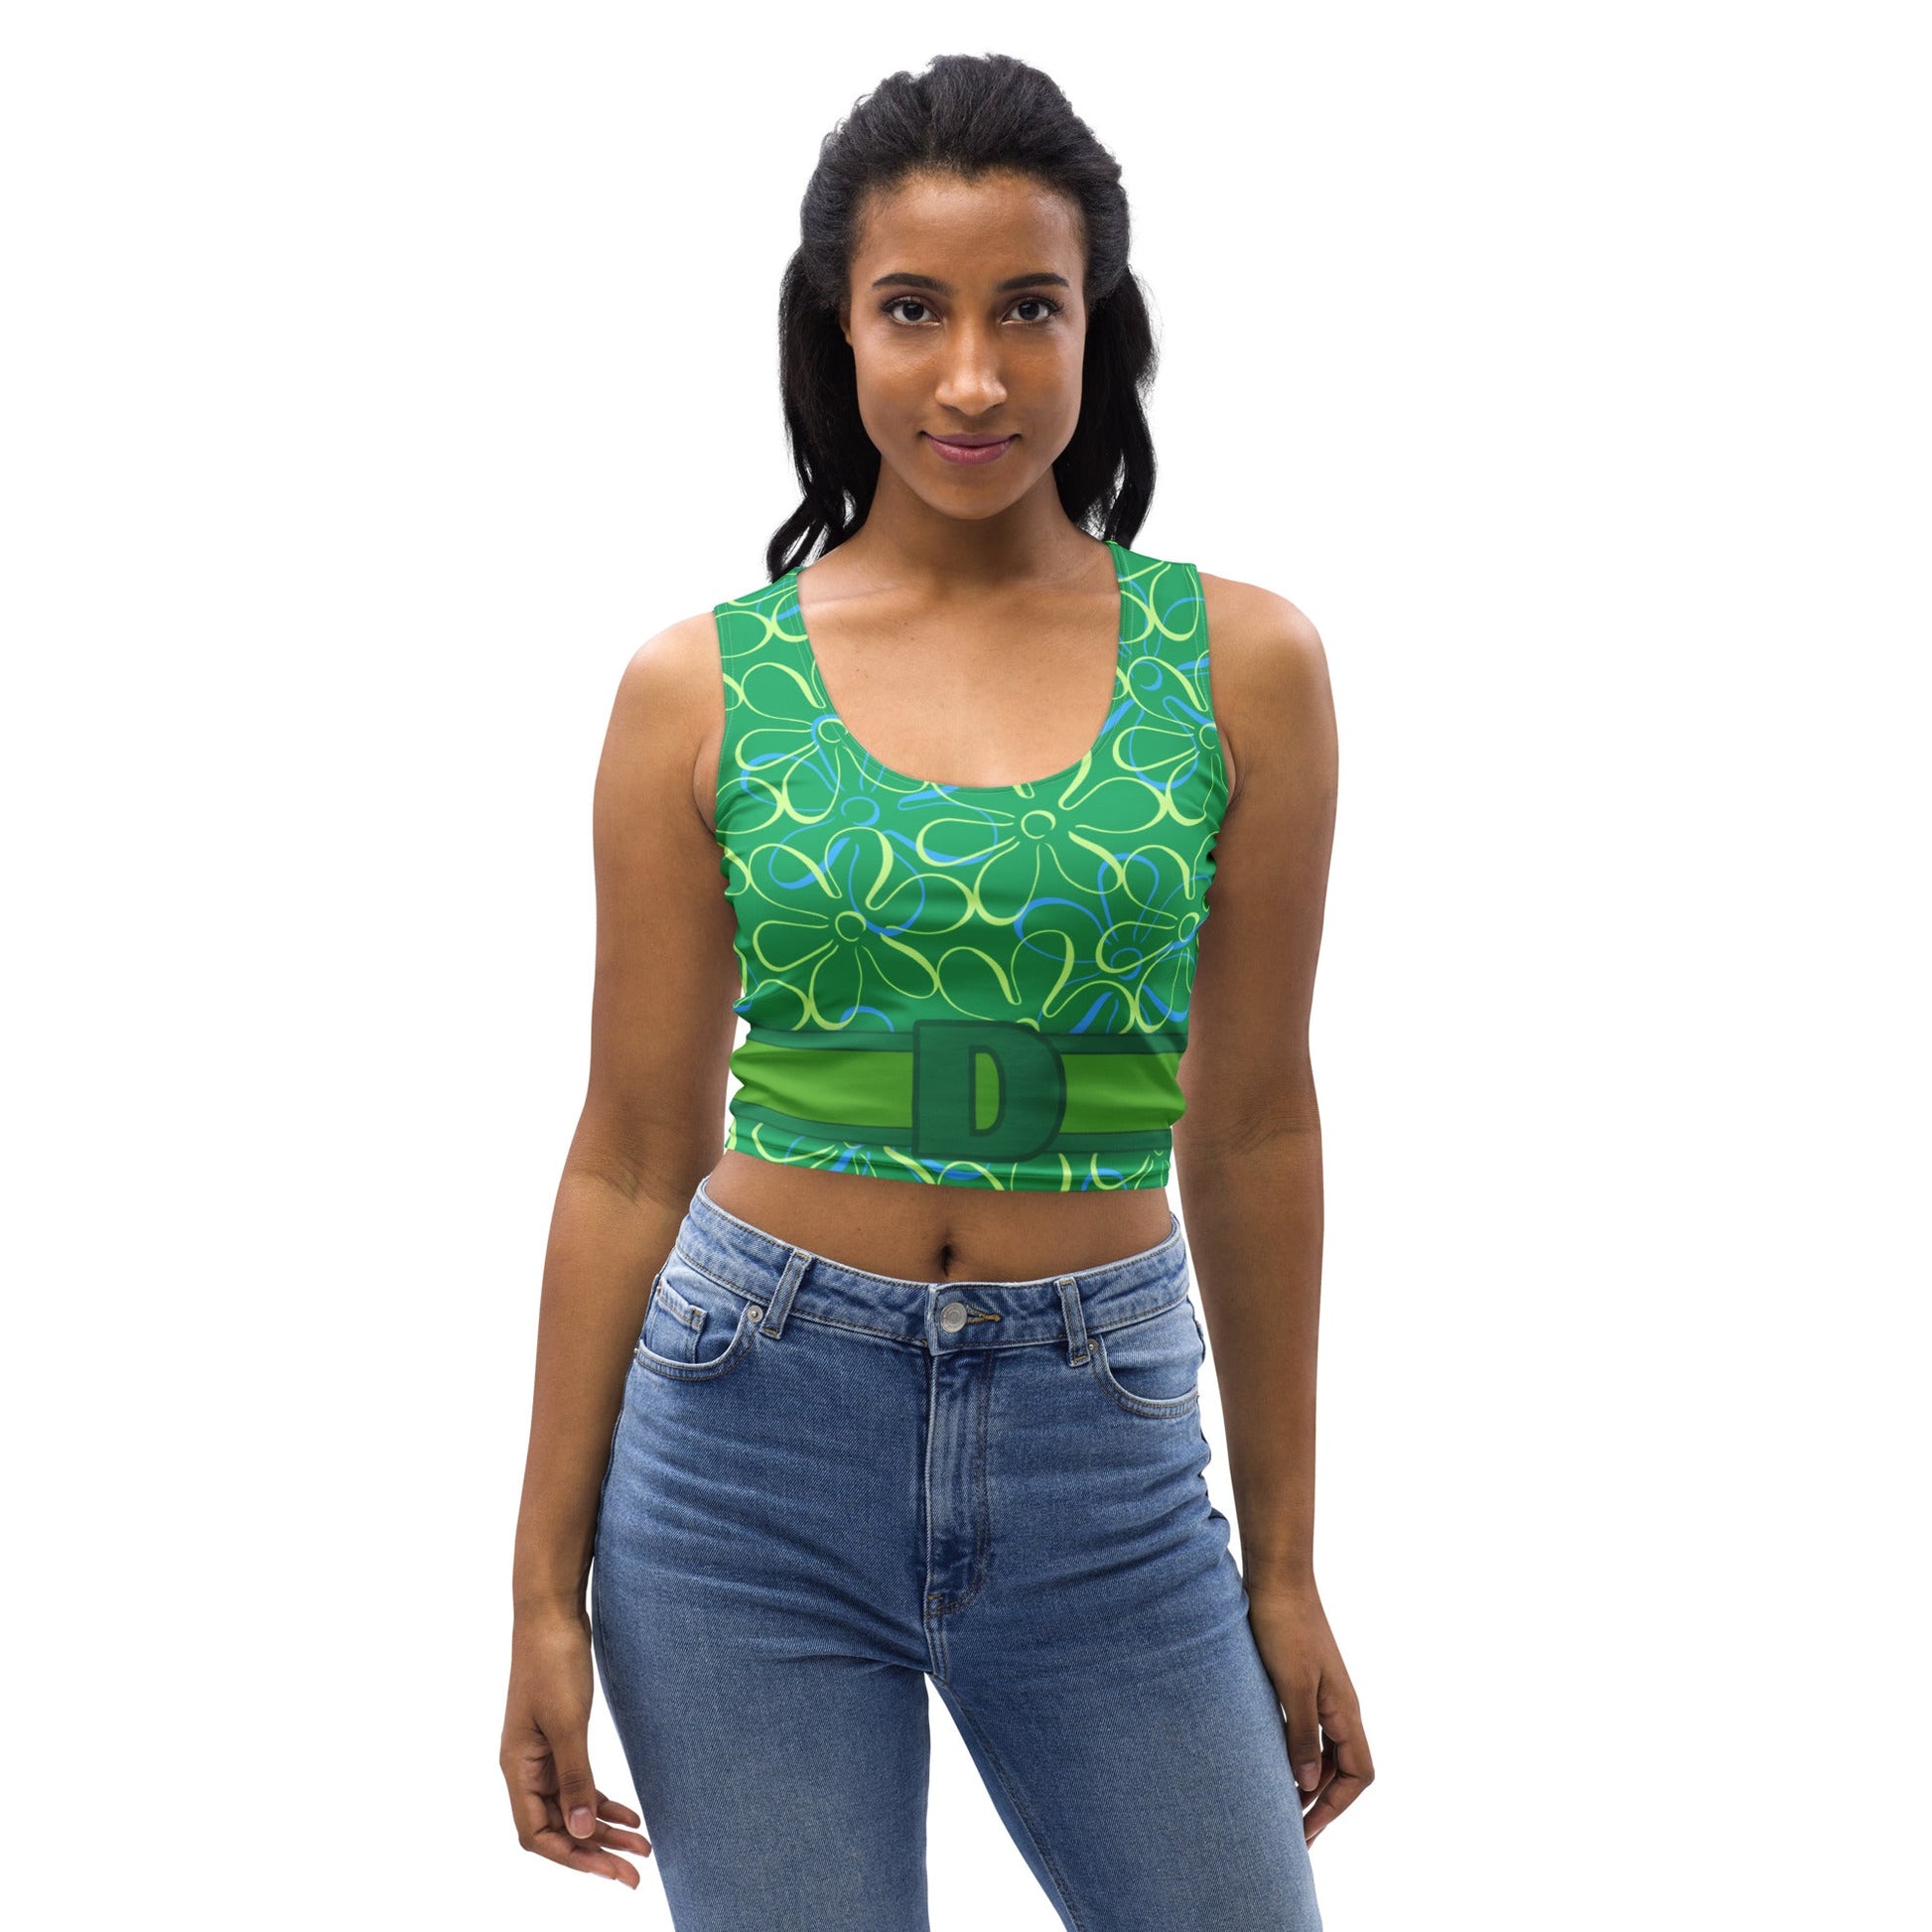 The Disgust Emotion Crop Top disgust costumedisgust styleWrong Lever Clothing